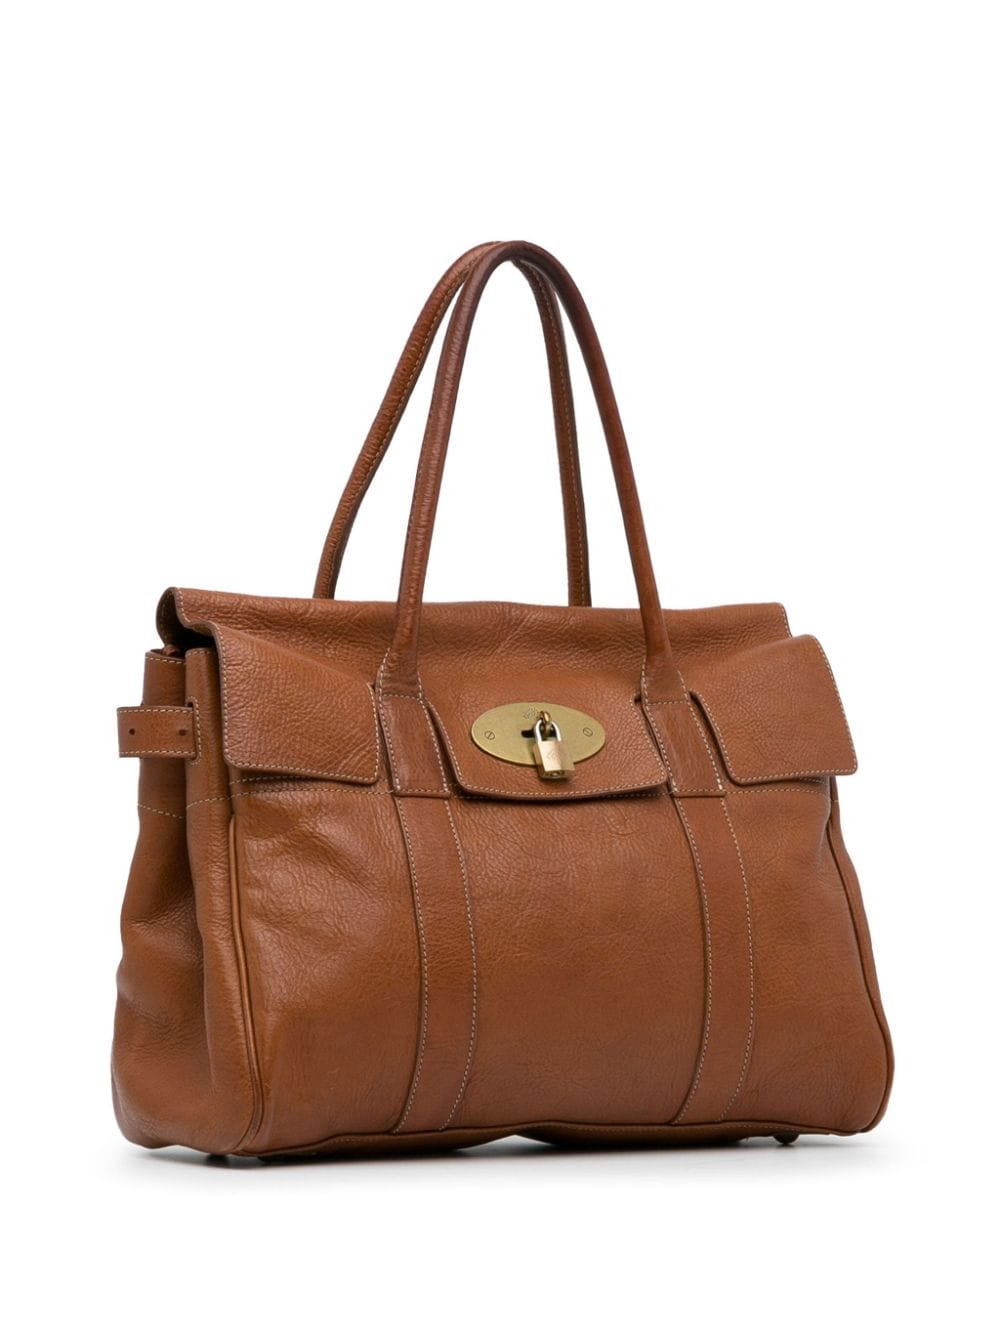 Pre-owned Mulberry 21st Century Bayswater Heritage Tote Bag In Brown